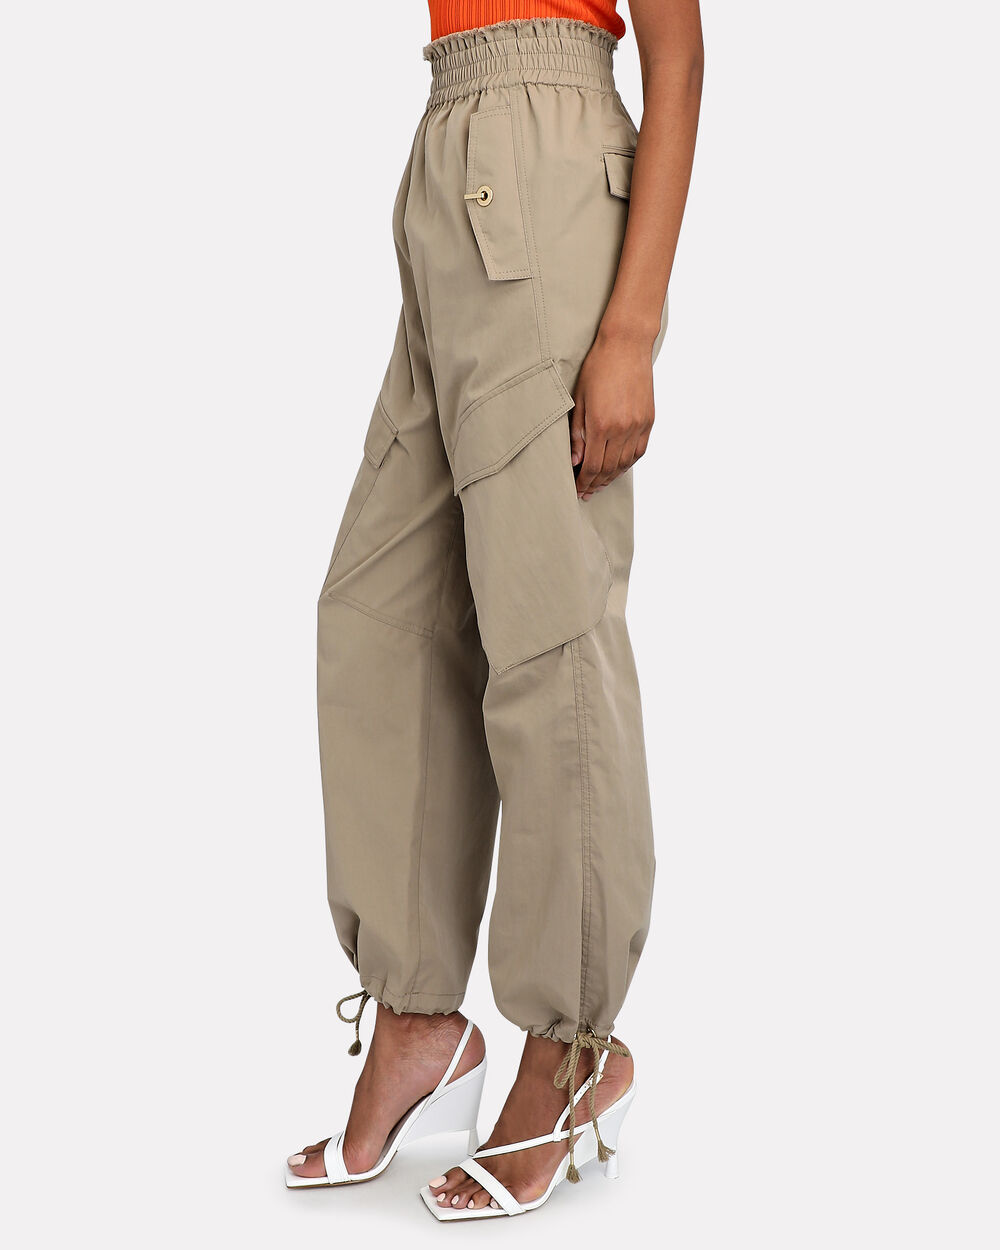 Dion Lee Frayed Rope Cotton Blend Cargo Pants